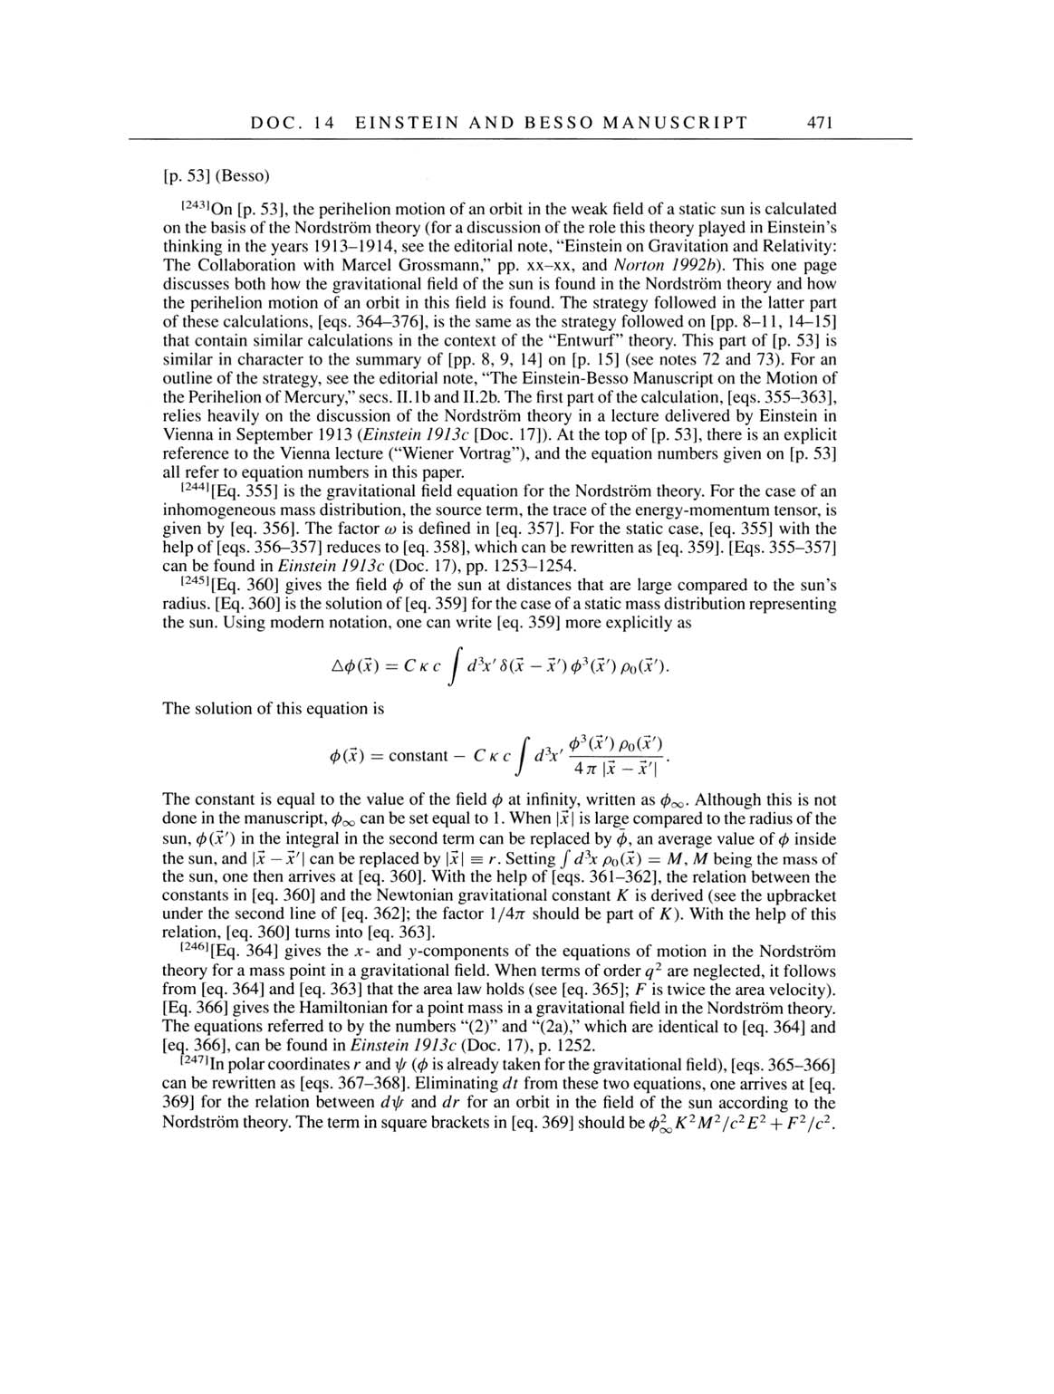 Volume 4: The Swiss Years: Writings 1912-1914 page 471